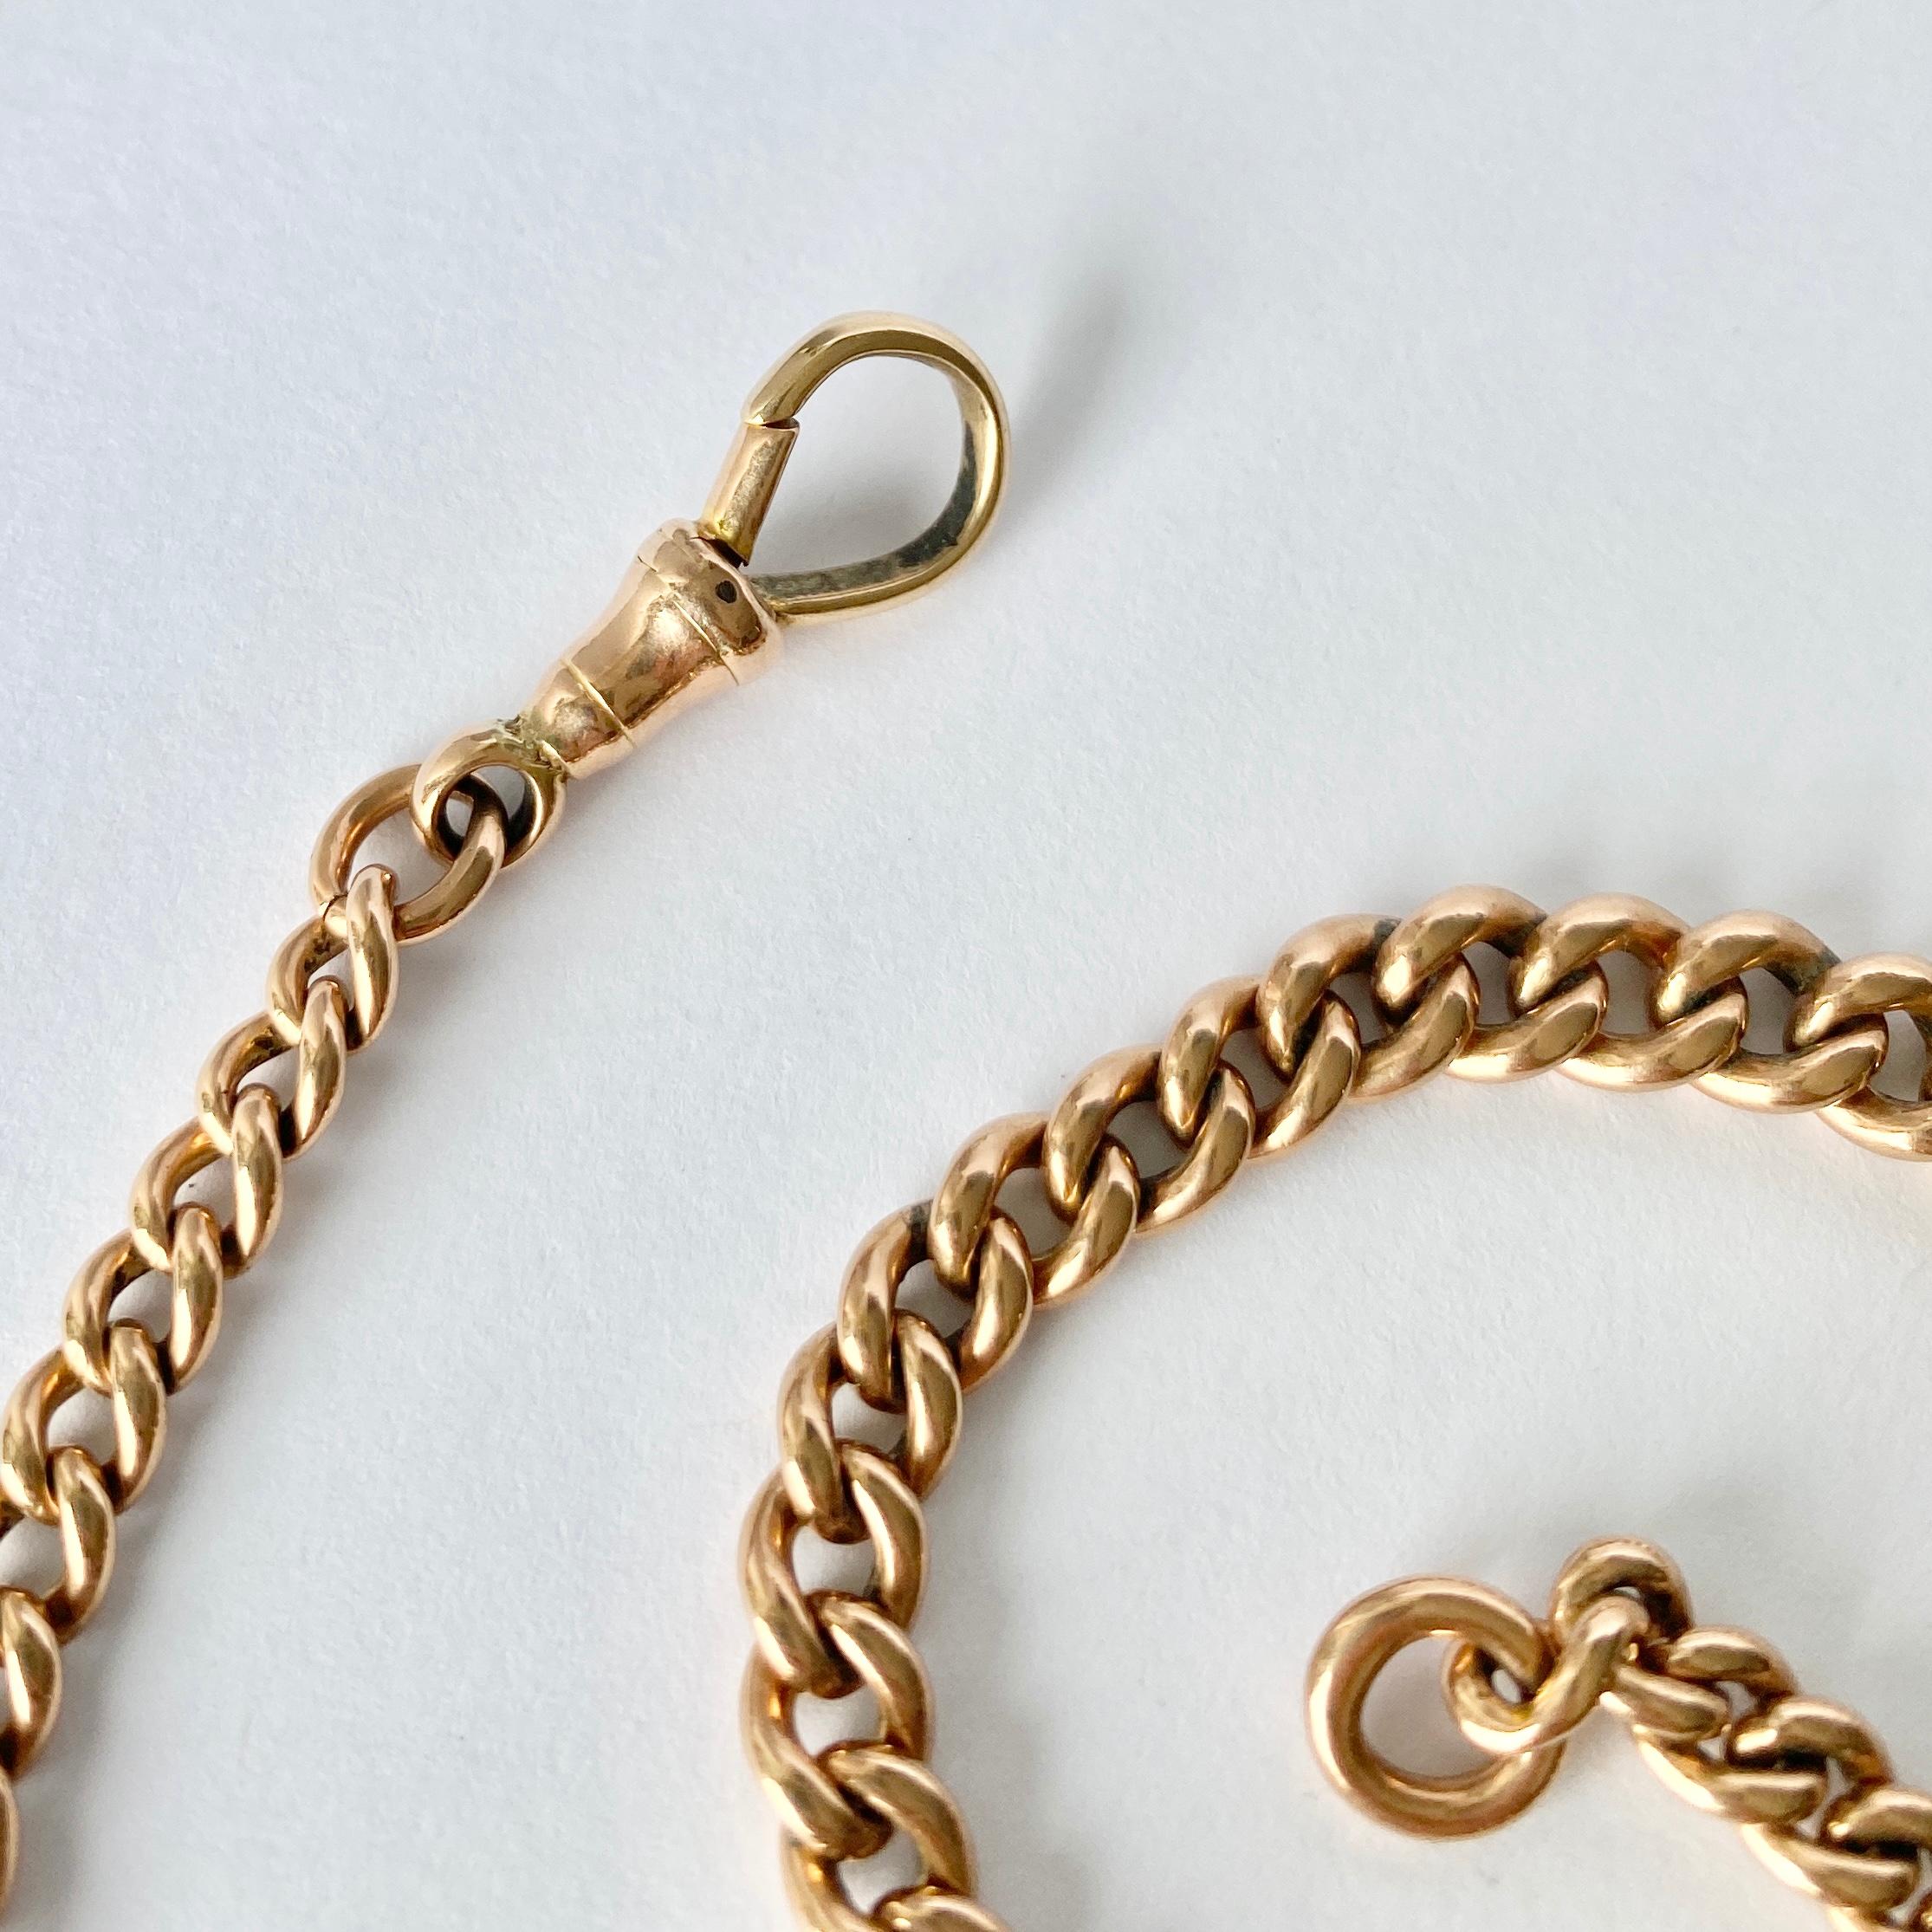 This rose gold albert chain is the perfect addition to any gents wardrobe or can be worn as a necklace and has a dog clip on one end. Each link is hallmarked and features a t-bar.. 

Length: 37cm
Chain Width: 5-8mm

Weight: 37g 